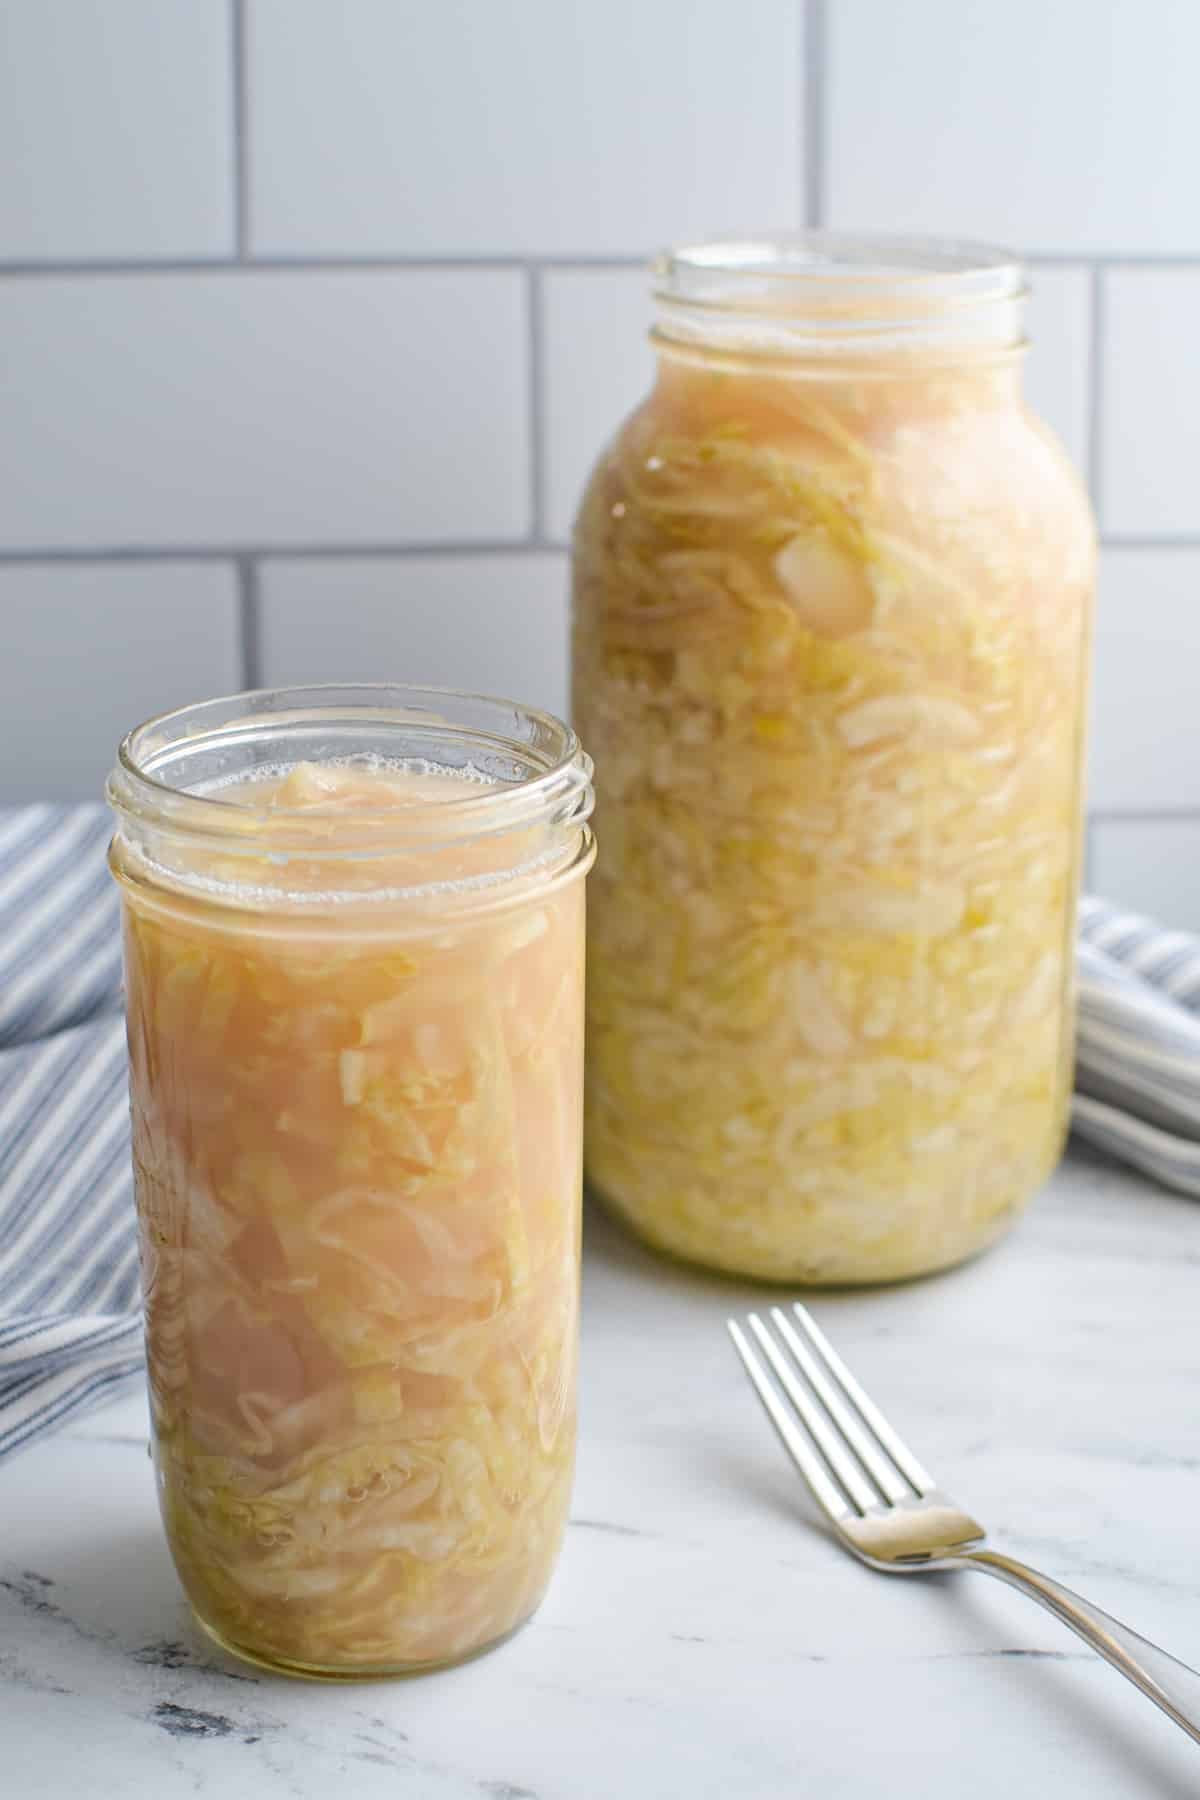 Two jars of sauerkraut on a marble countertop.